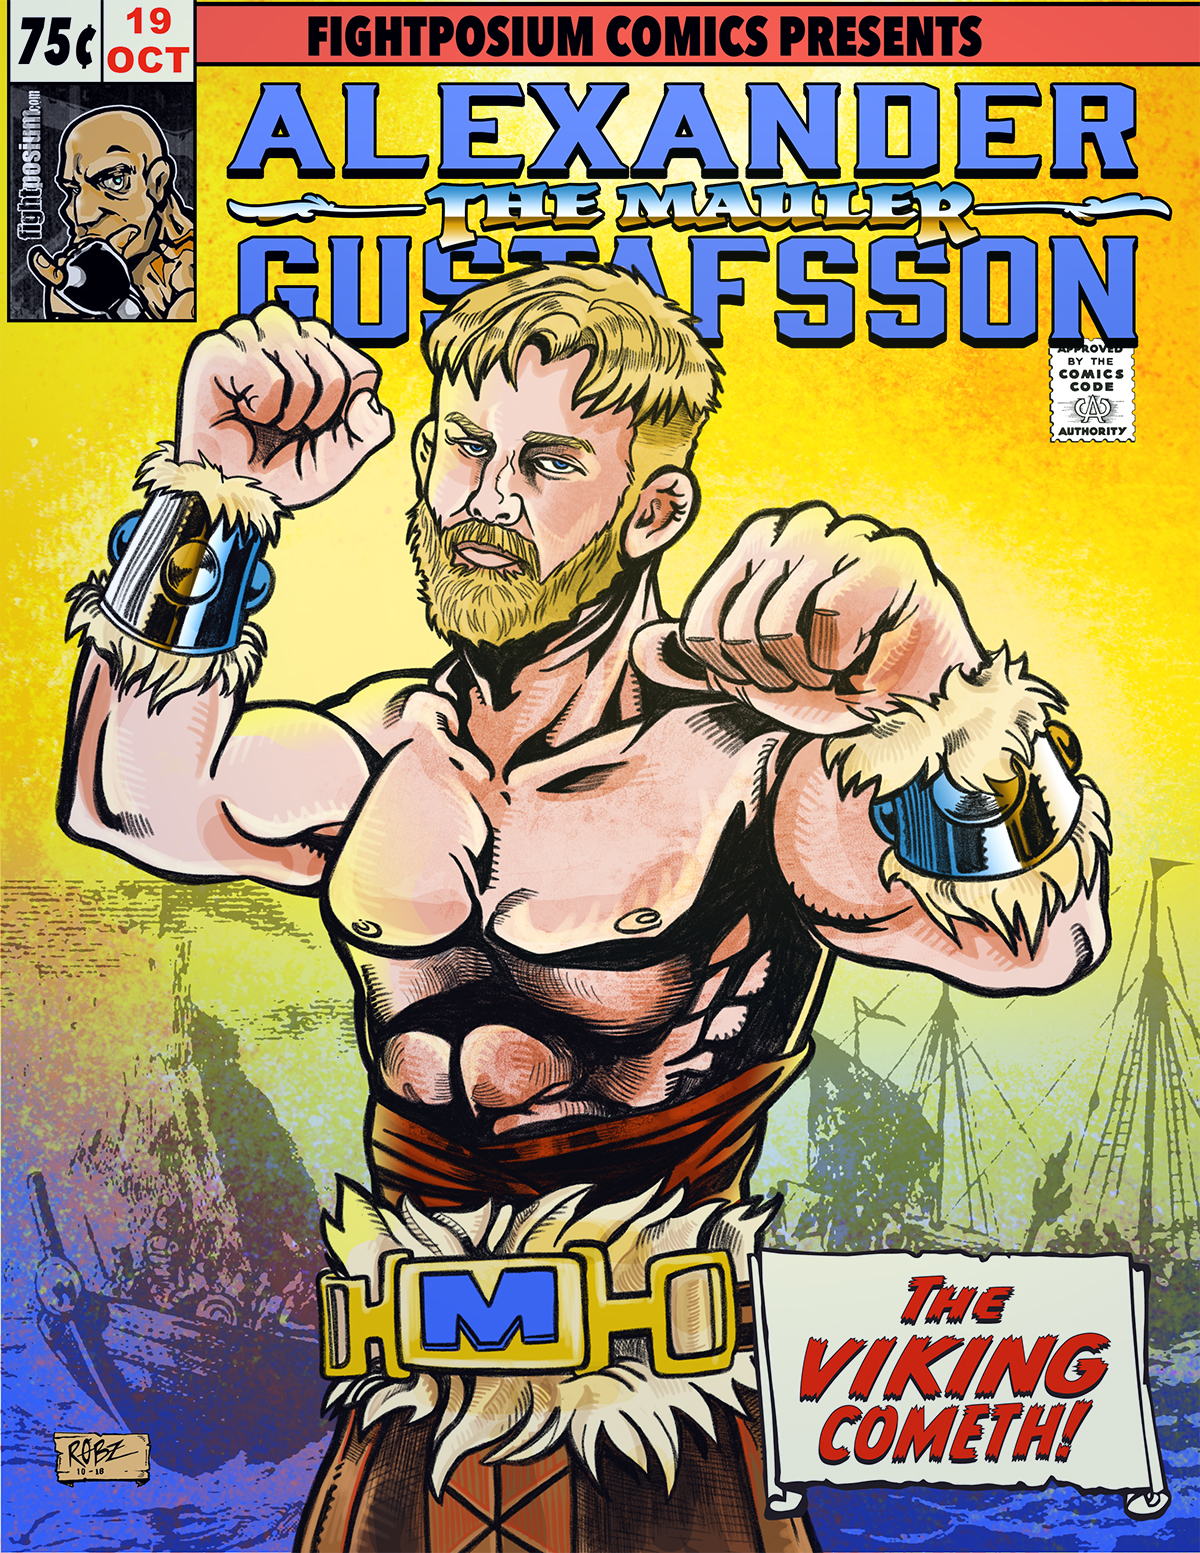 Read more about the article Alexander “The Mauler” Gustafsson – The Viking Cometh!!